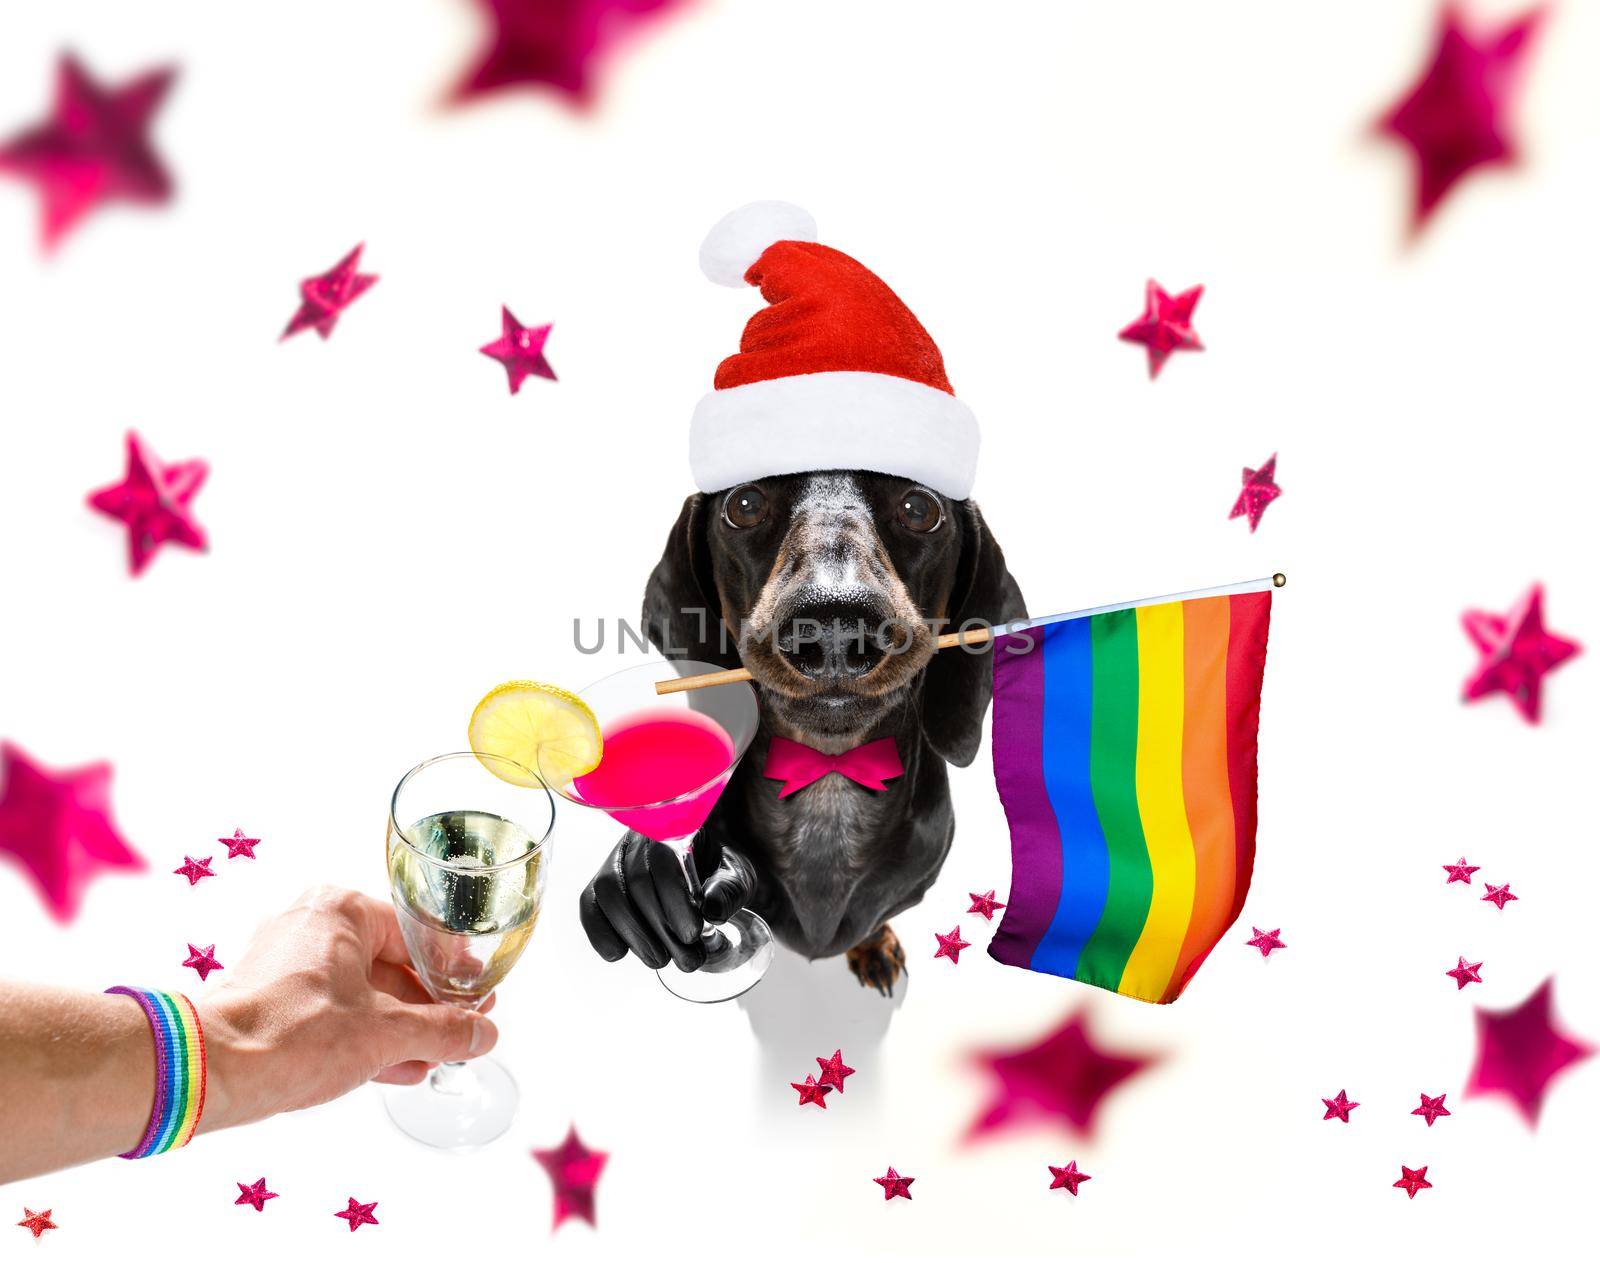 happy new year dog celberation by Brosch